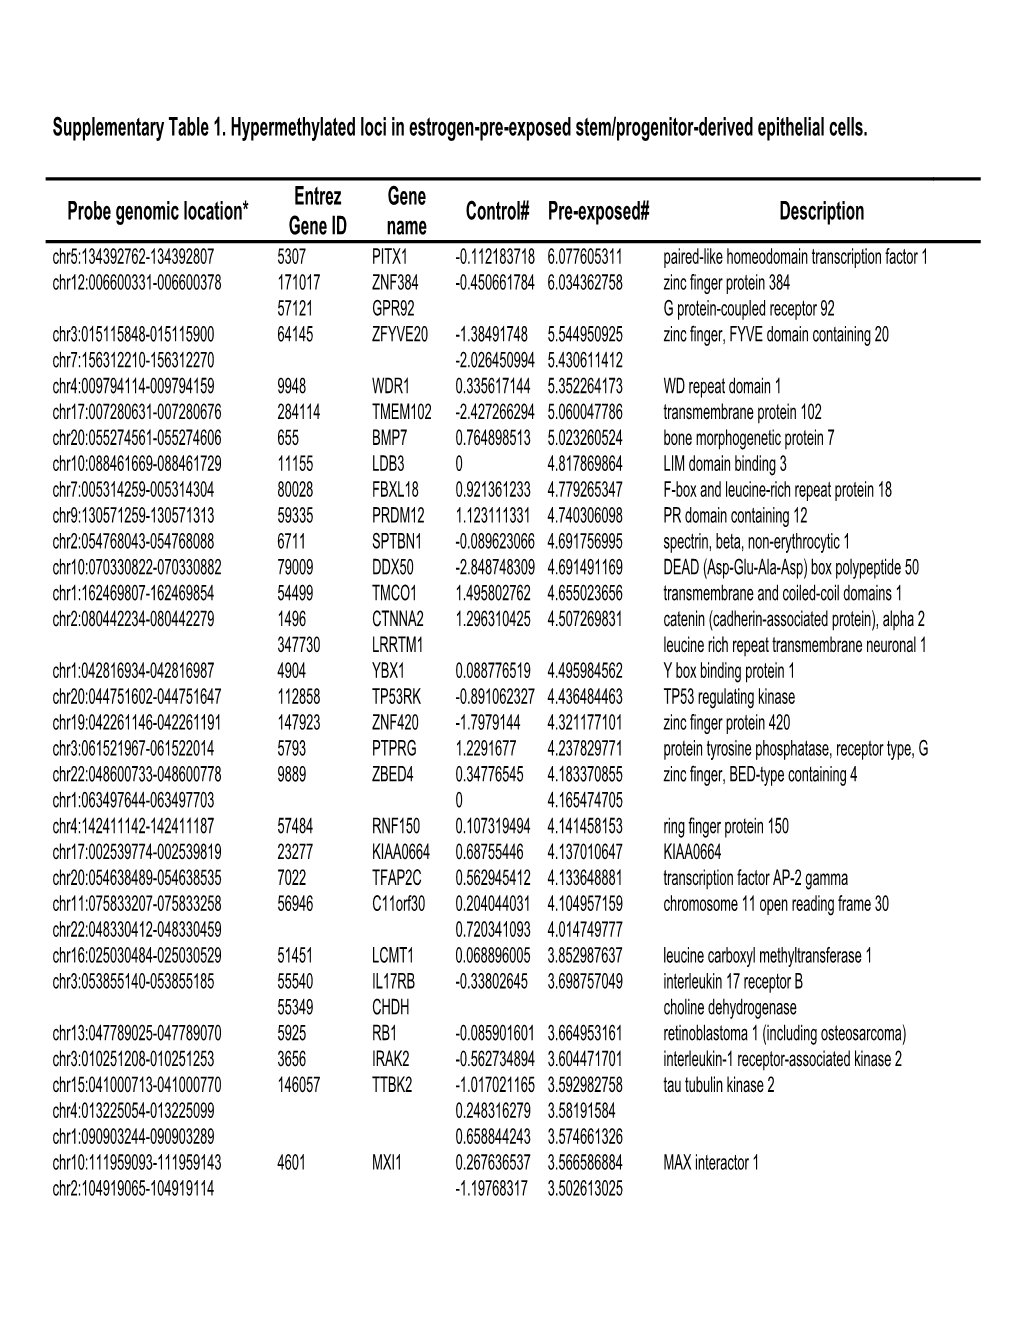 Supplementary Table 1. Hypermethylated Loci in Estrogen-Pre-Exposed Stem/Progenitor-Derived Epithelial Cells